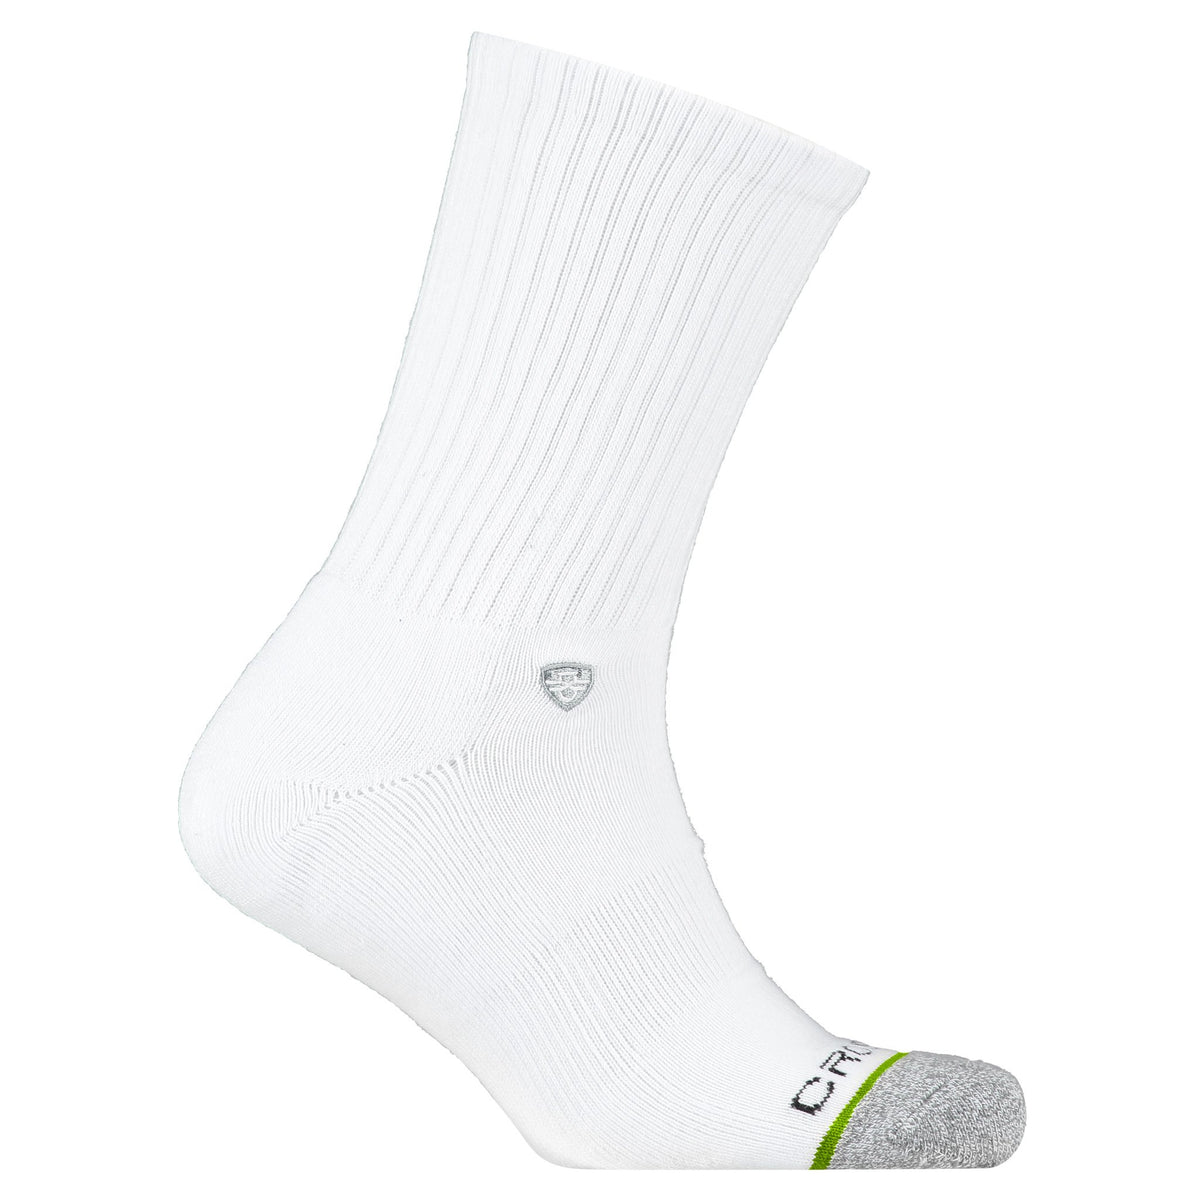 Crossfly men&#39;s Original Crew Socks in white from the Everyday series, featuring Flat Toe Seams and 360 Hold.